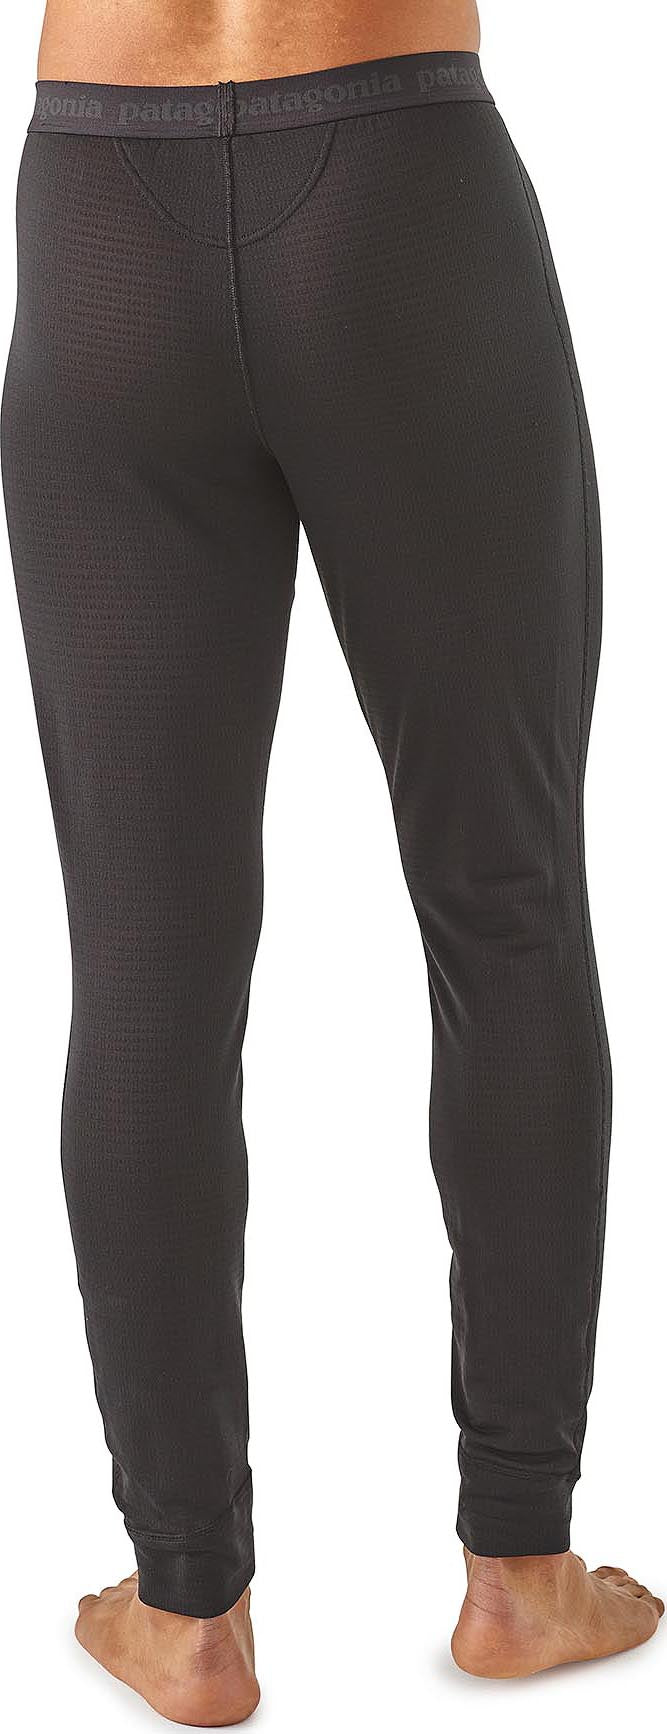 Patagonia: Women's Capilene® Thermal Weight Bottoms - Black Size